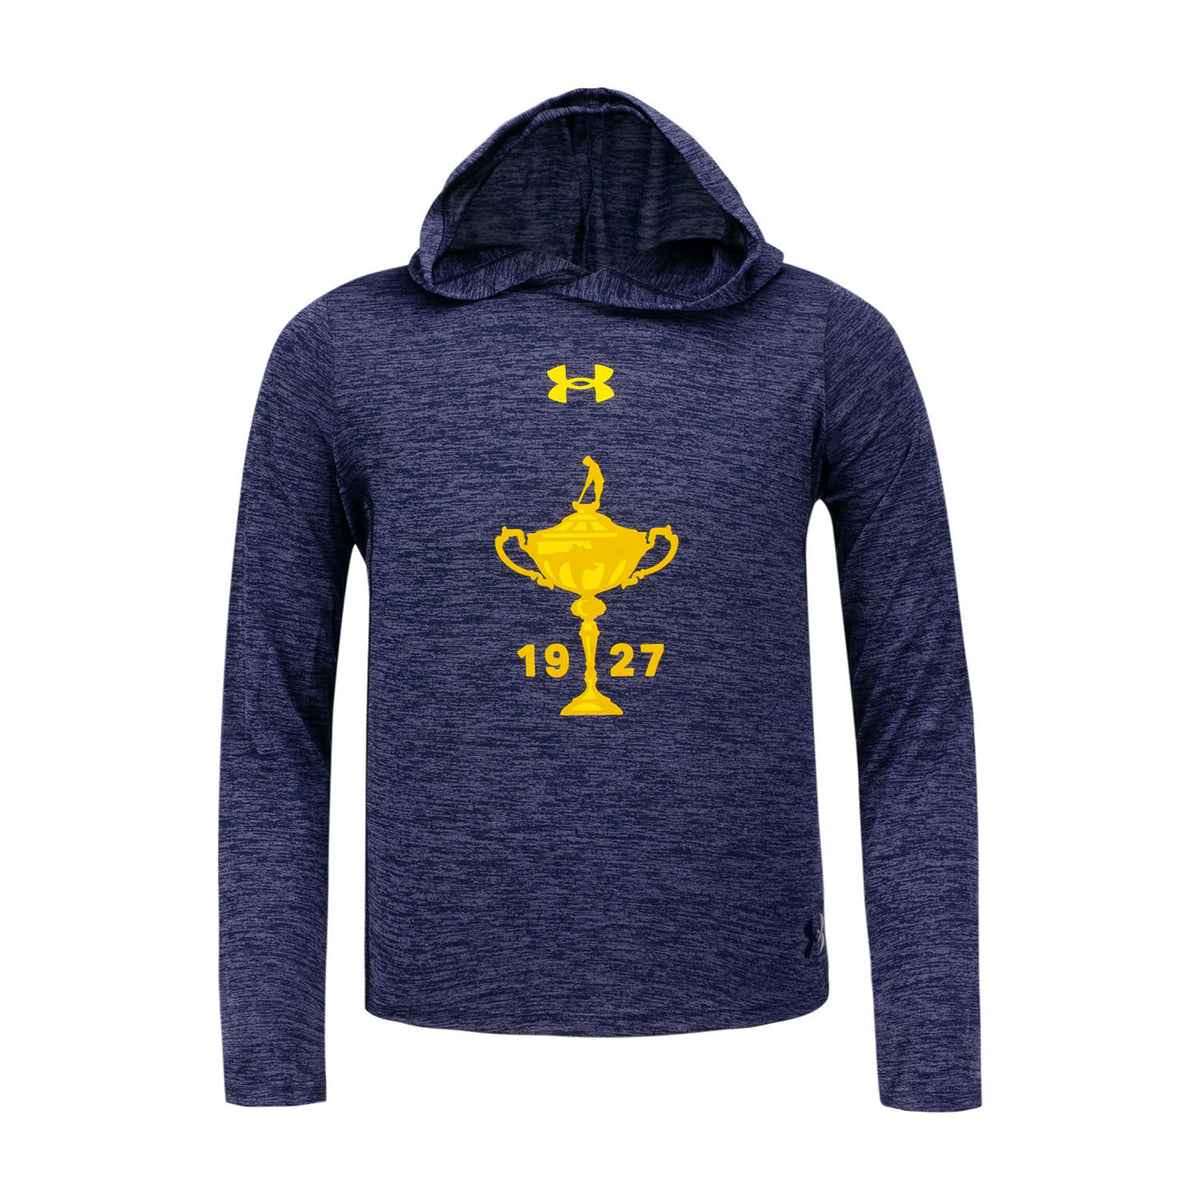 Ryder Cup Girls Youth Twist Tech Hoodie in Navy- Front View